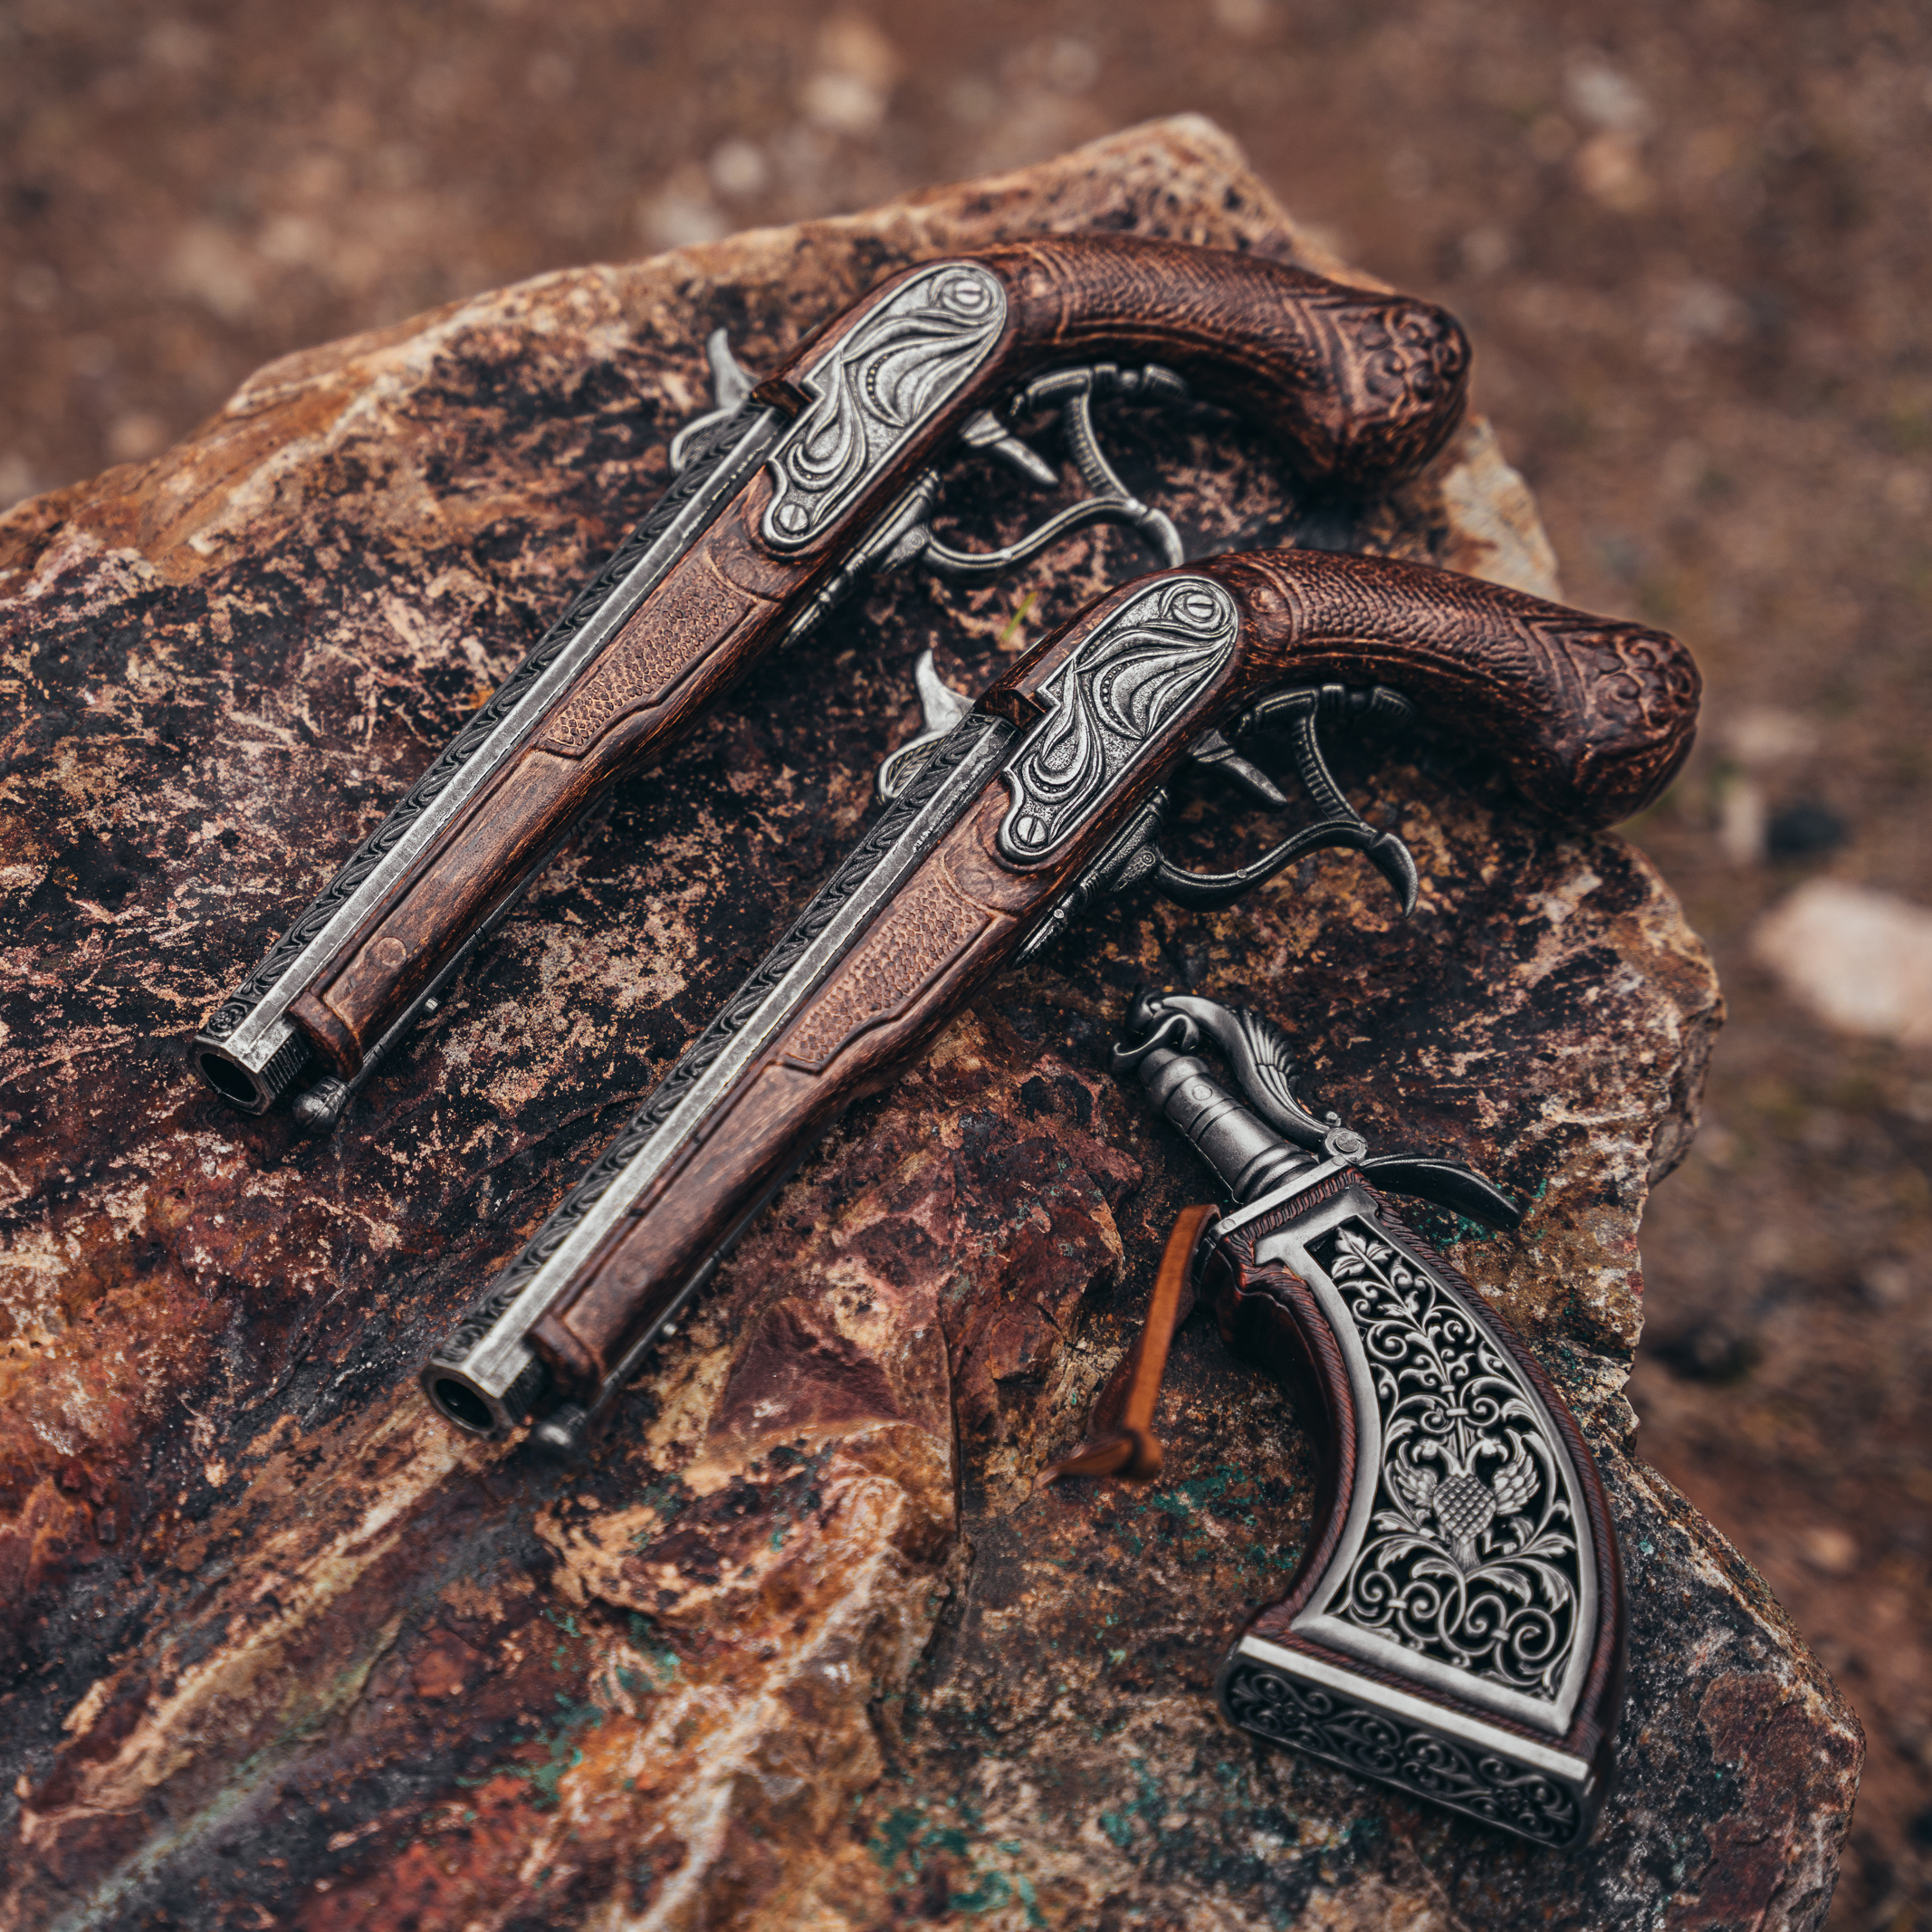 two pirate dueling flintlocks with ornate powder horn sitting on a rock